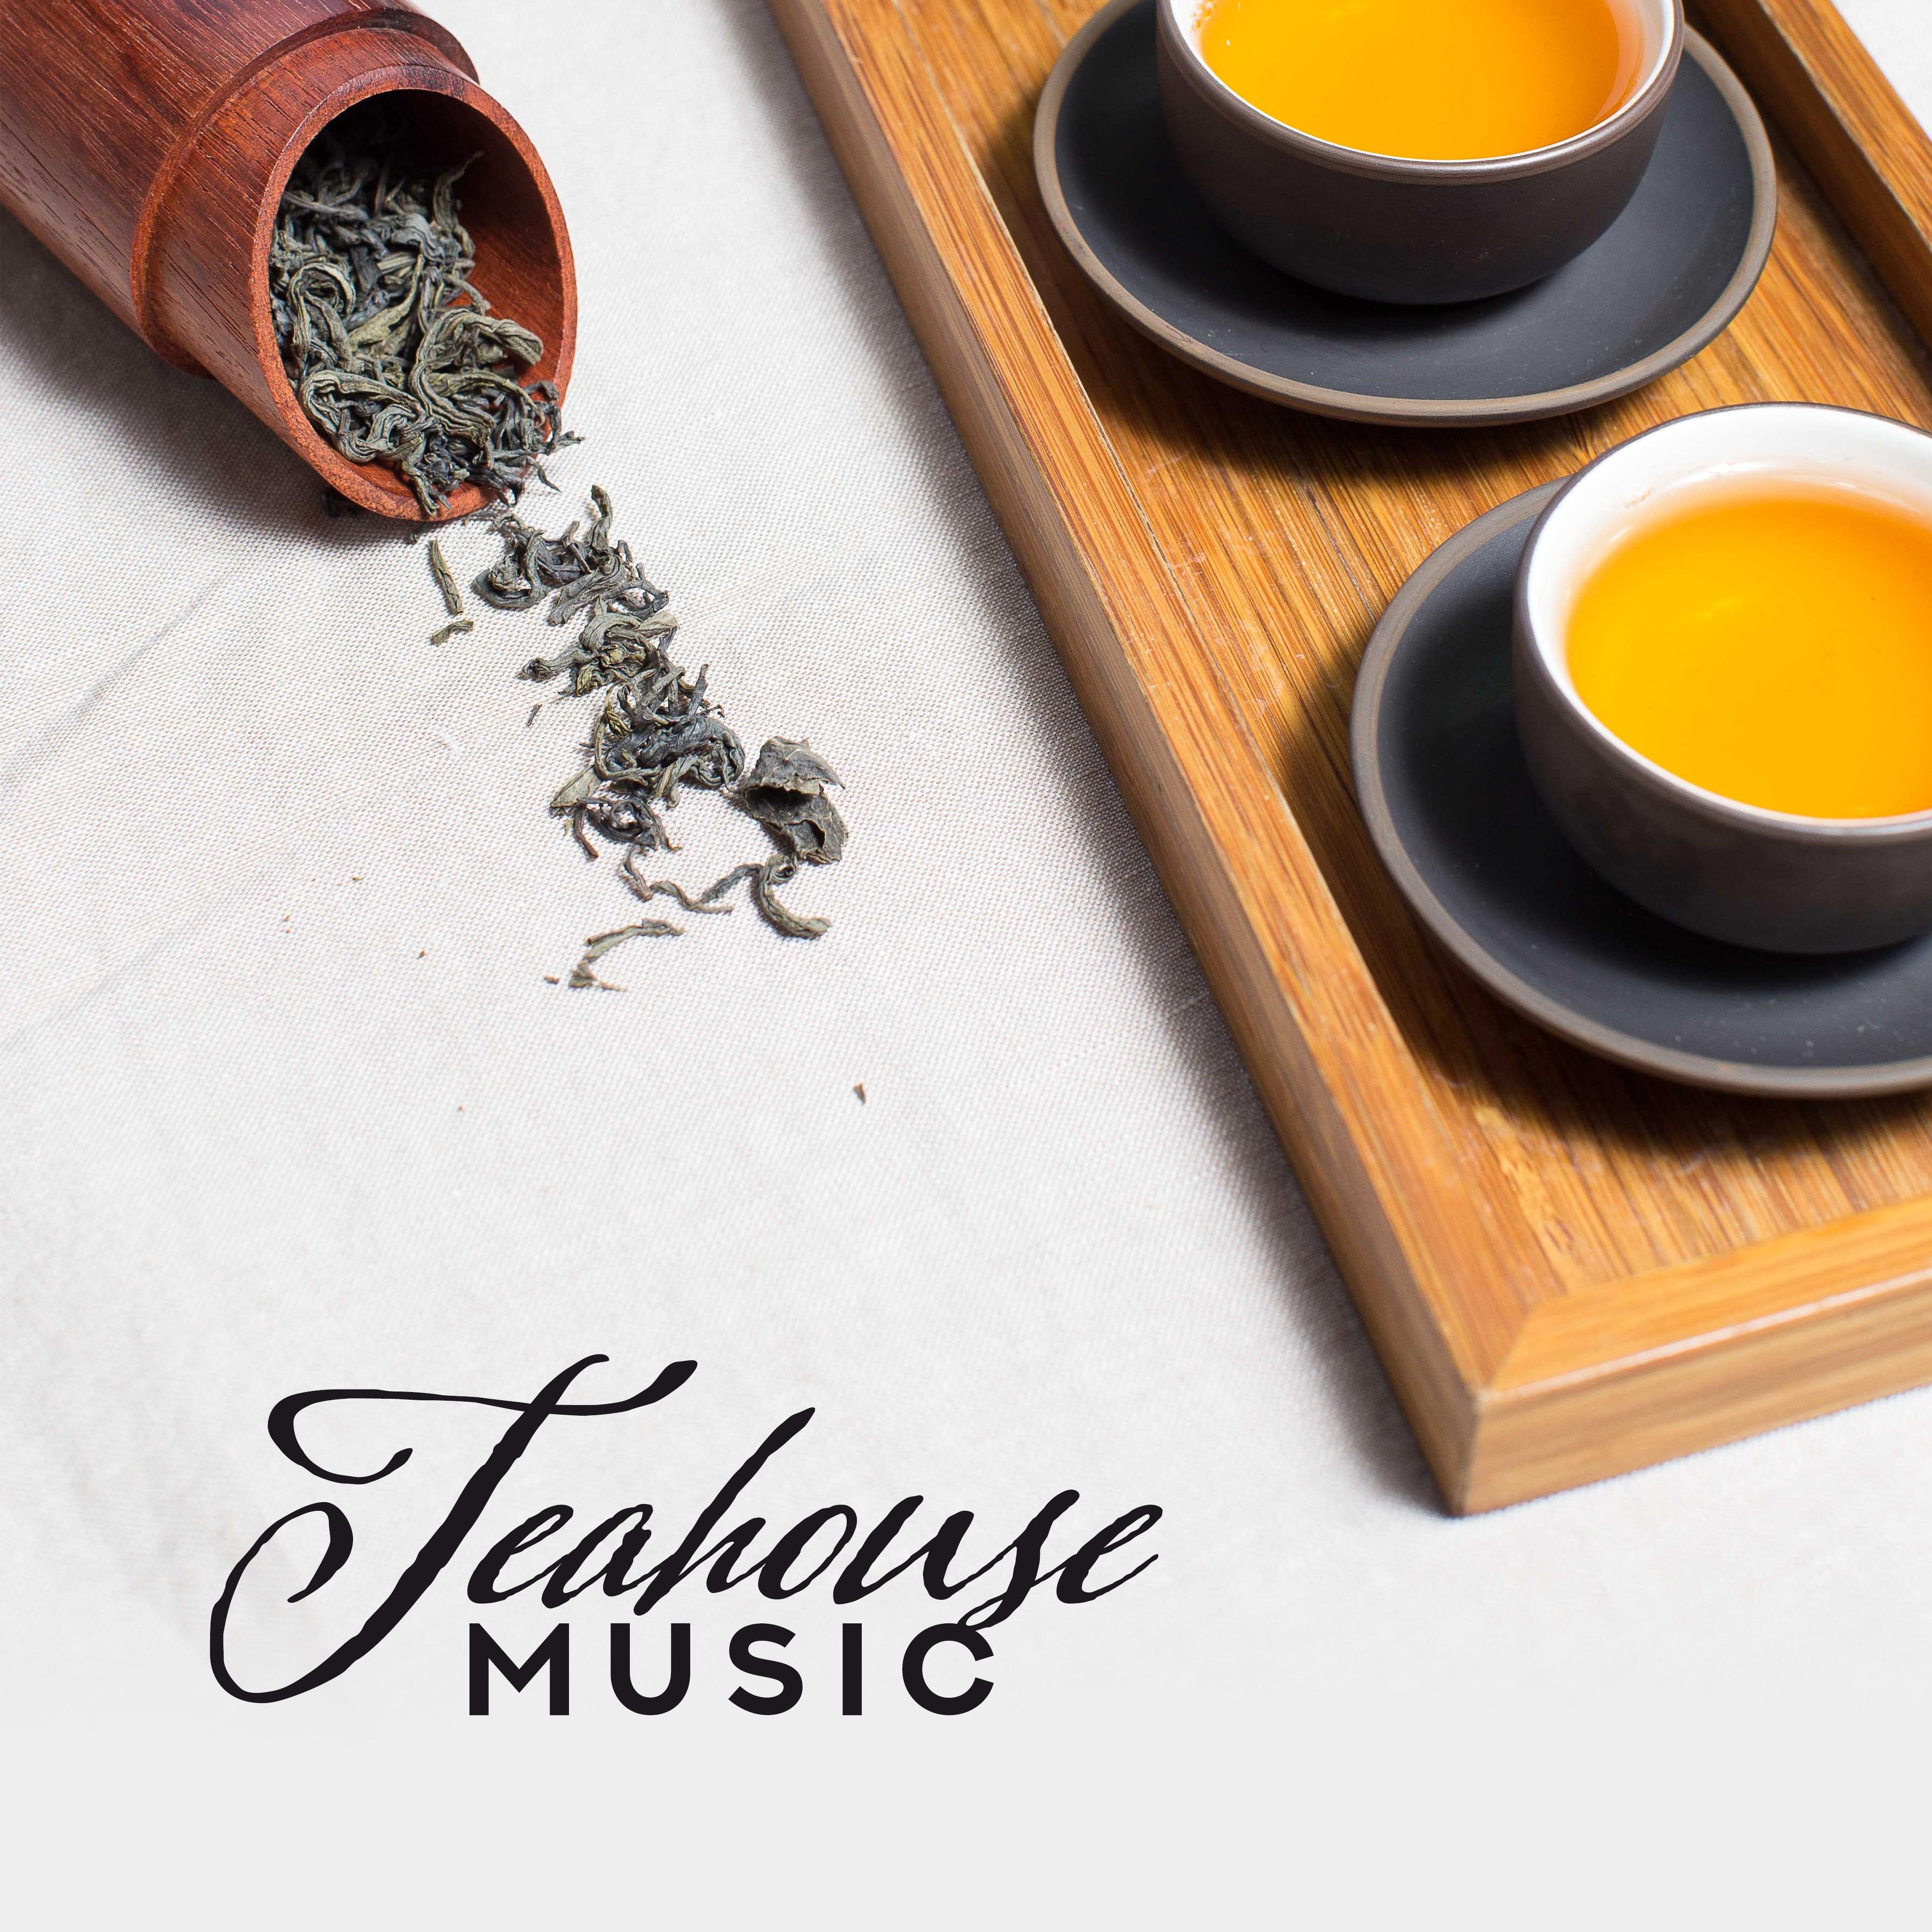 Teahouse Music – Instrumental Jazz Music for Real Tea Connoisseurs